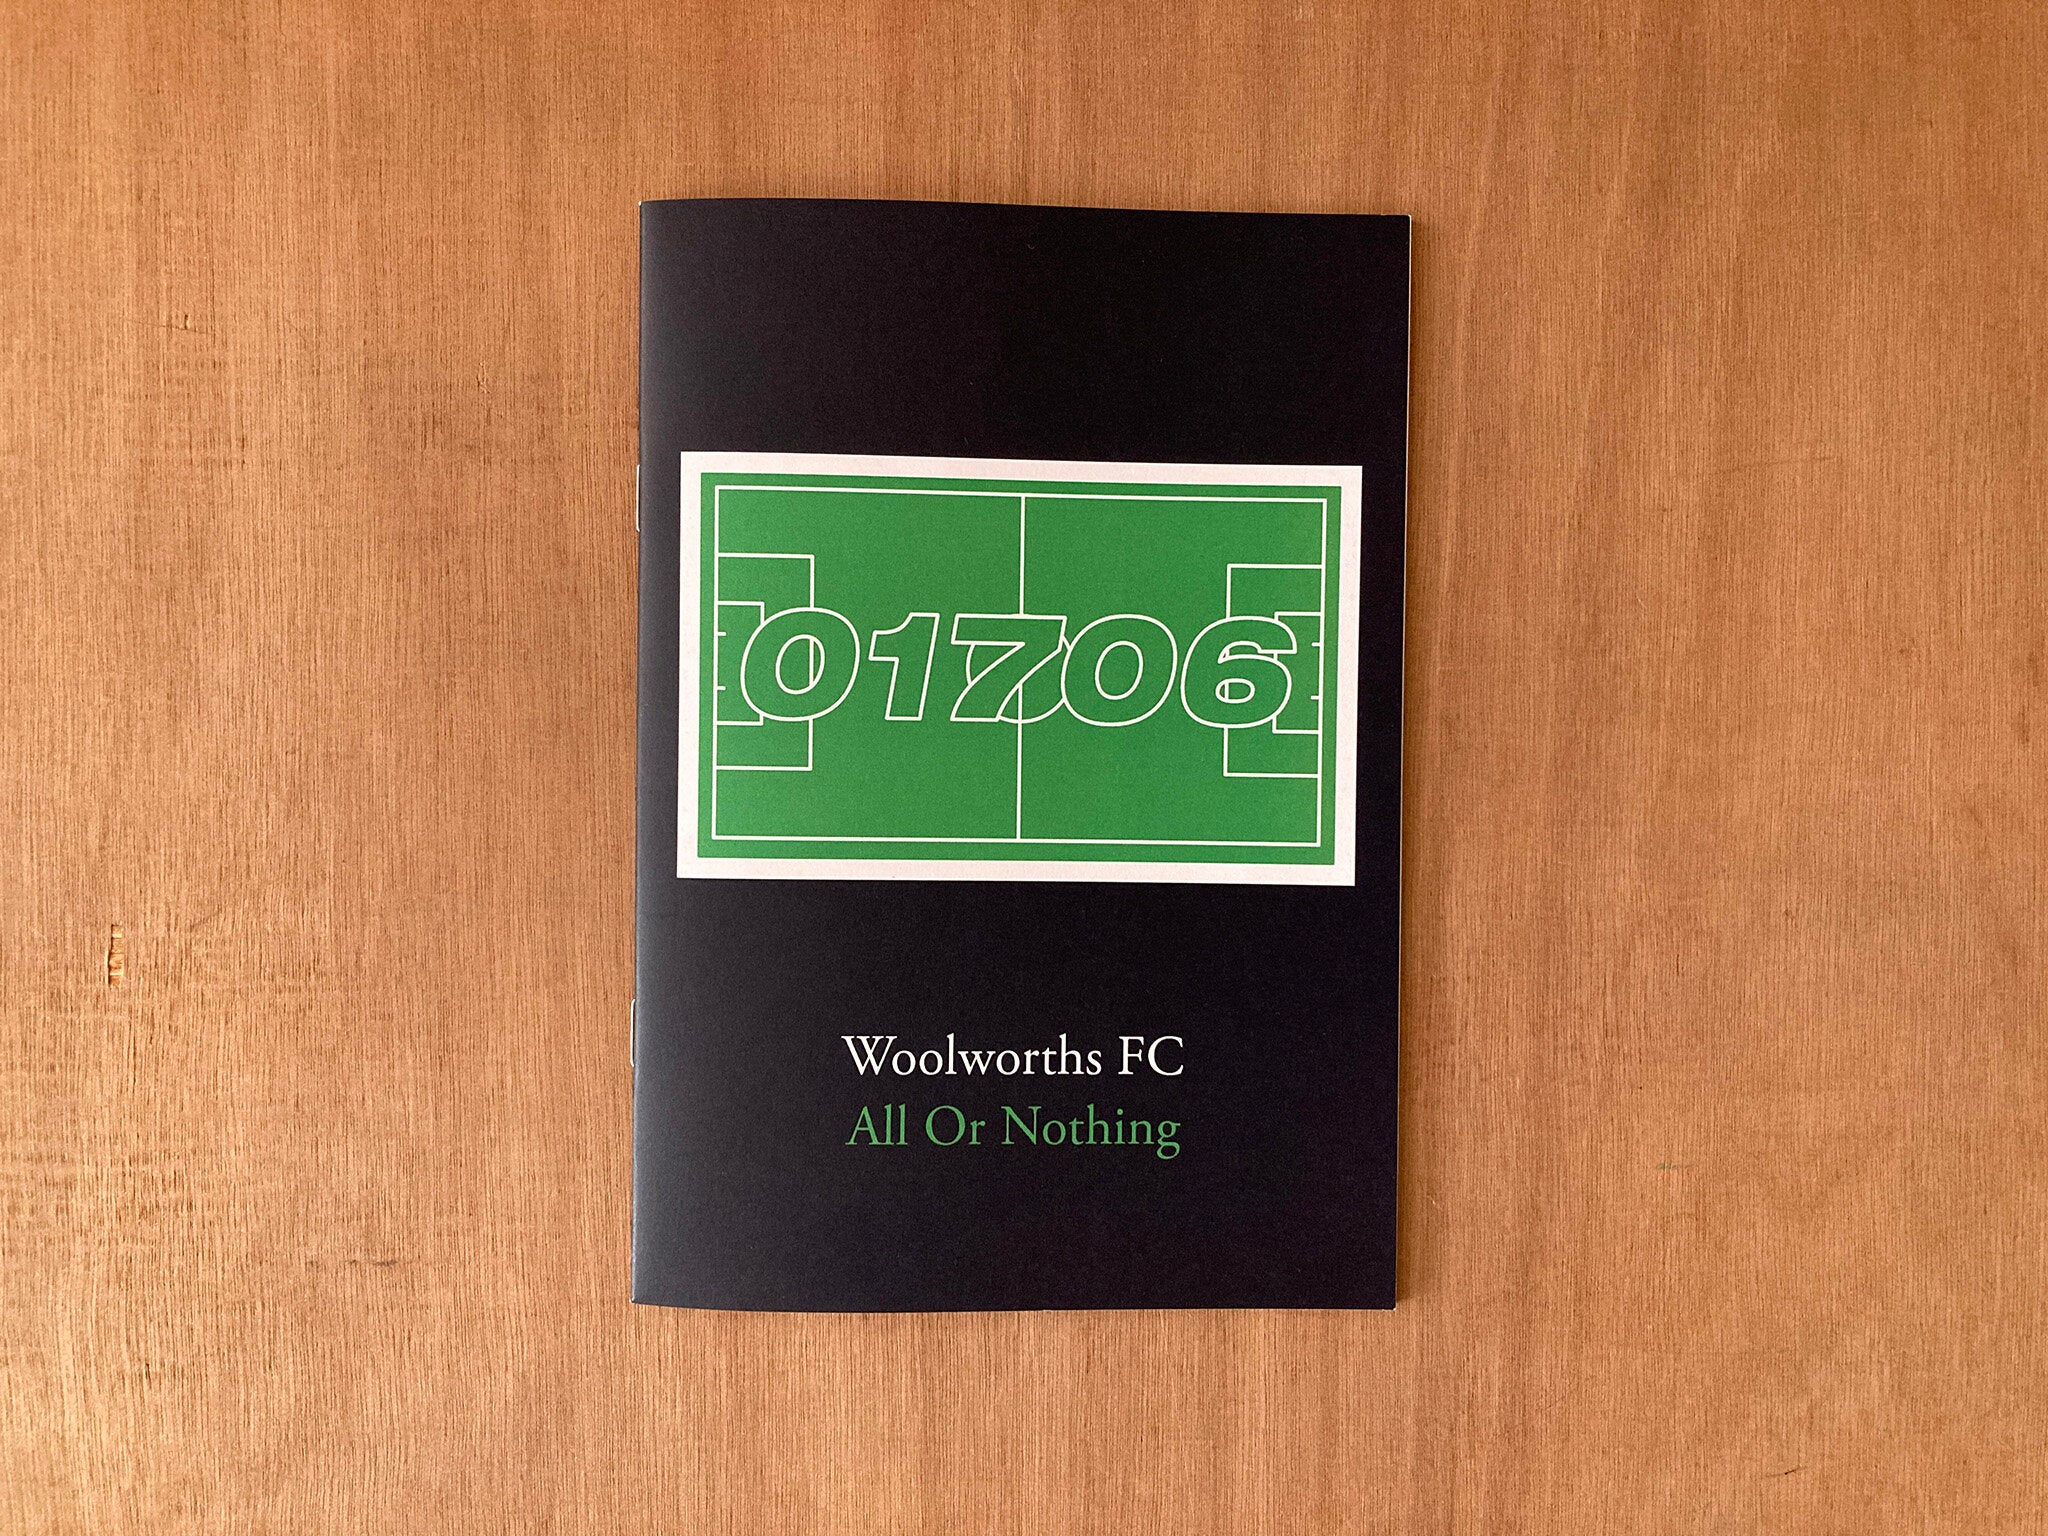 01706 ISSUE 4 - WOOLWORTHS FC: ALL OR NOTHING by Oliver Jackson